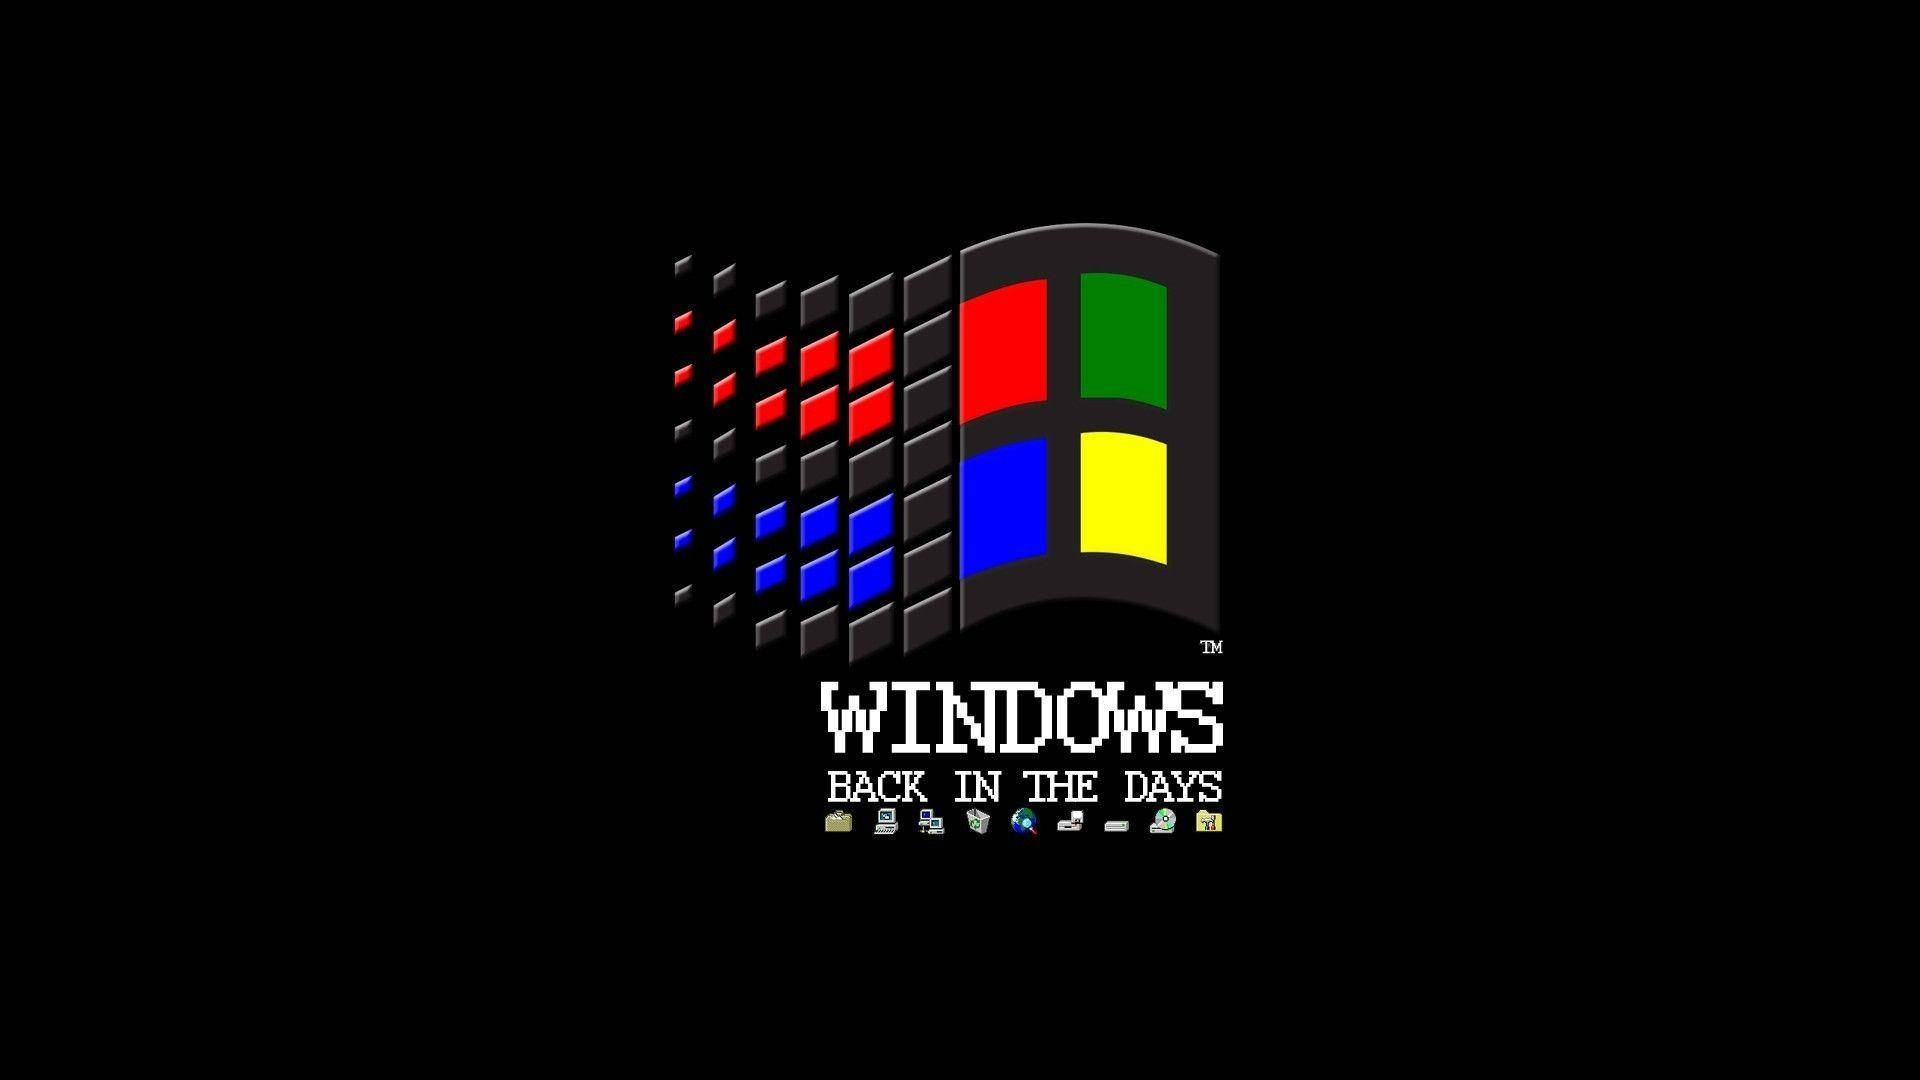 "Iconic Operating System: Windows 98" Wallpaper